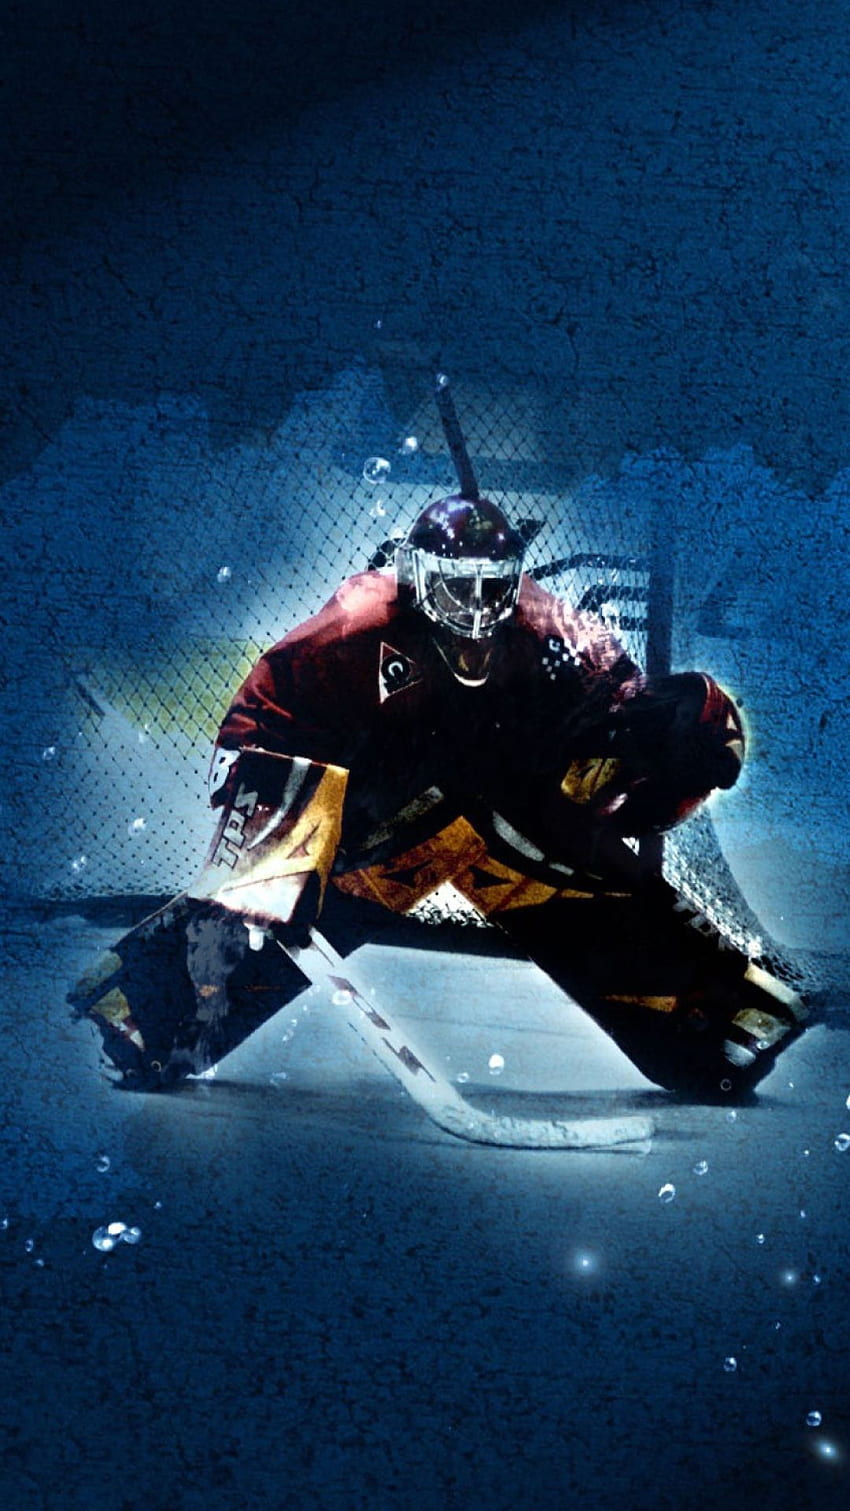 NHL Hockey Wallpaper 61 pictures